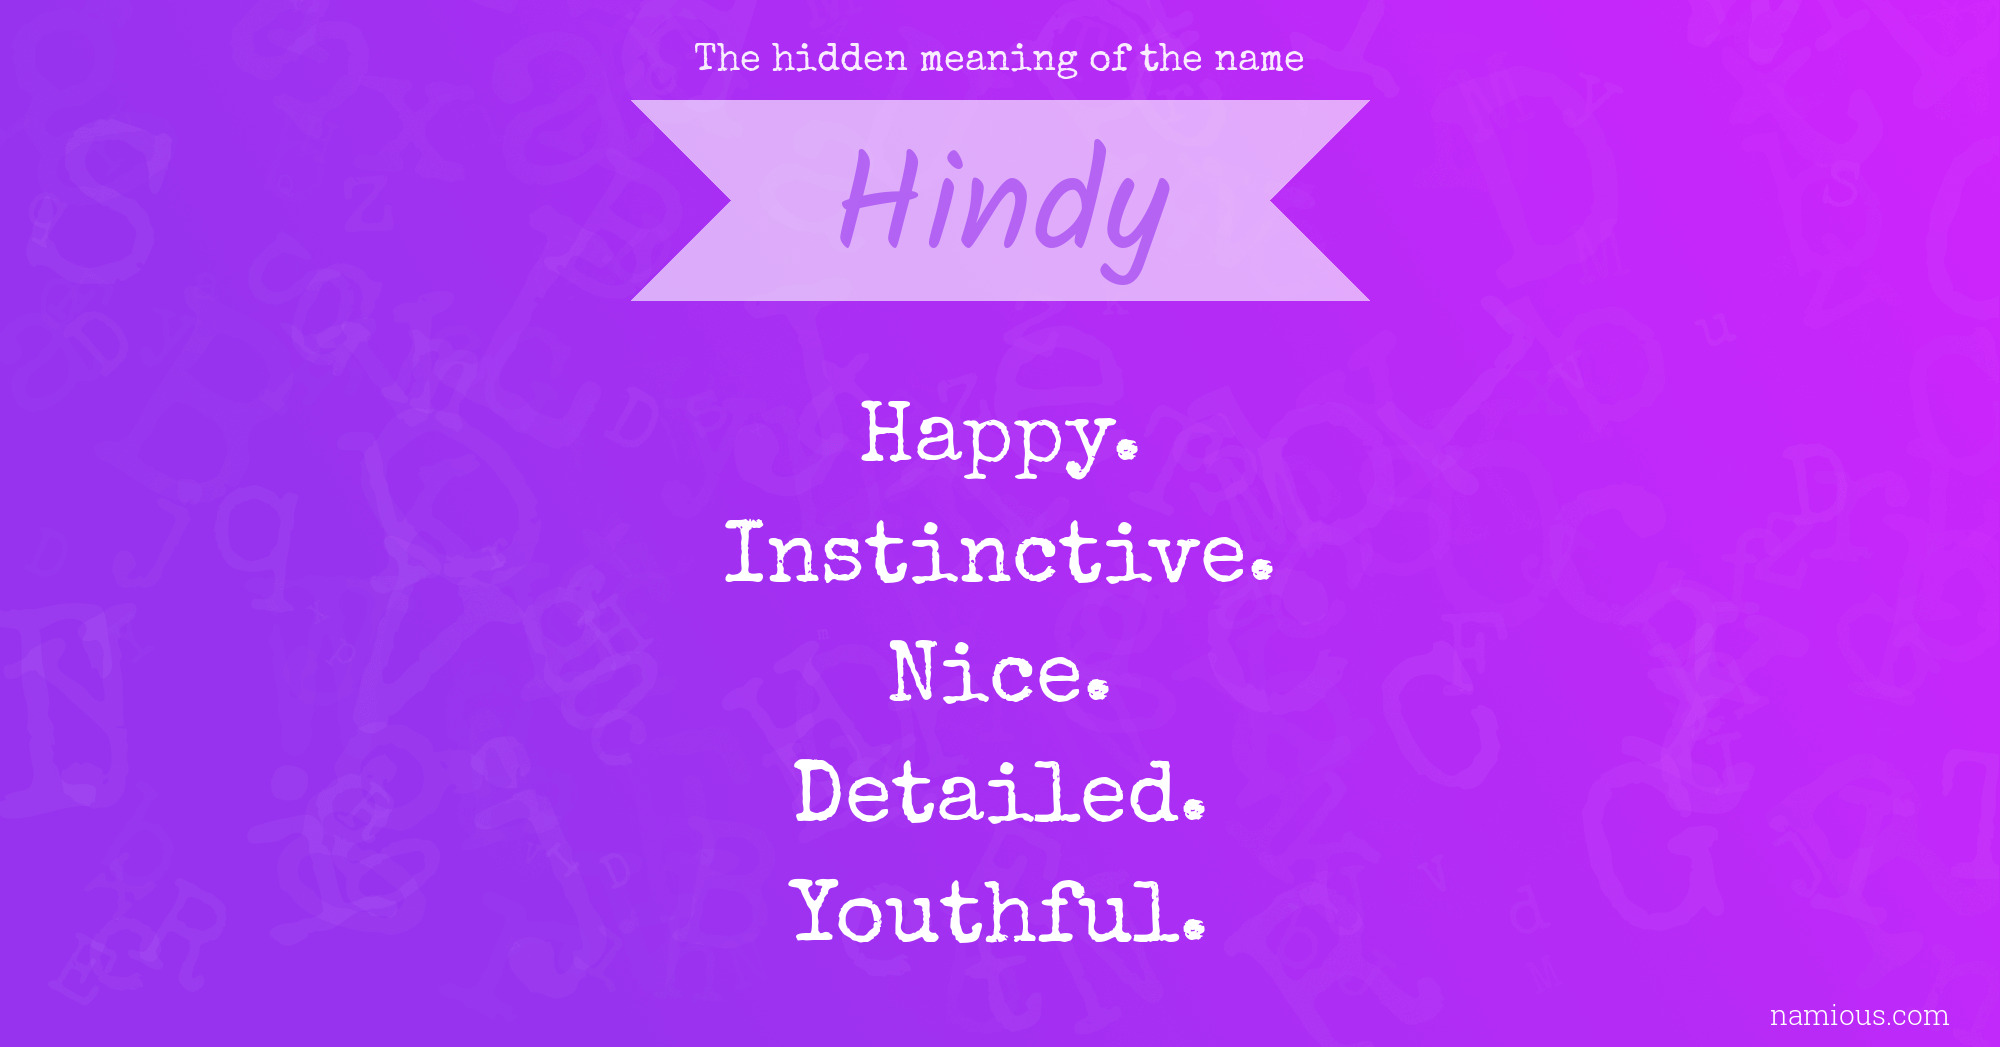 The hidden meaning of the name Hindy